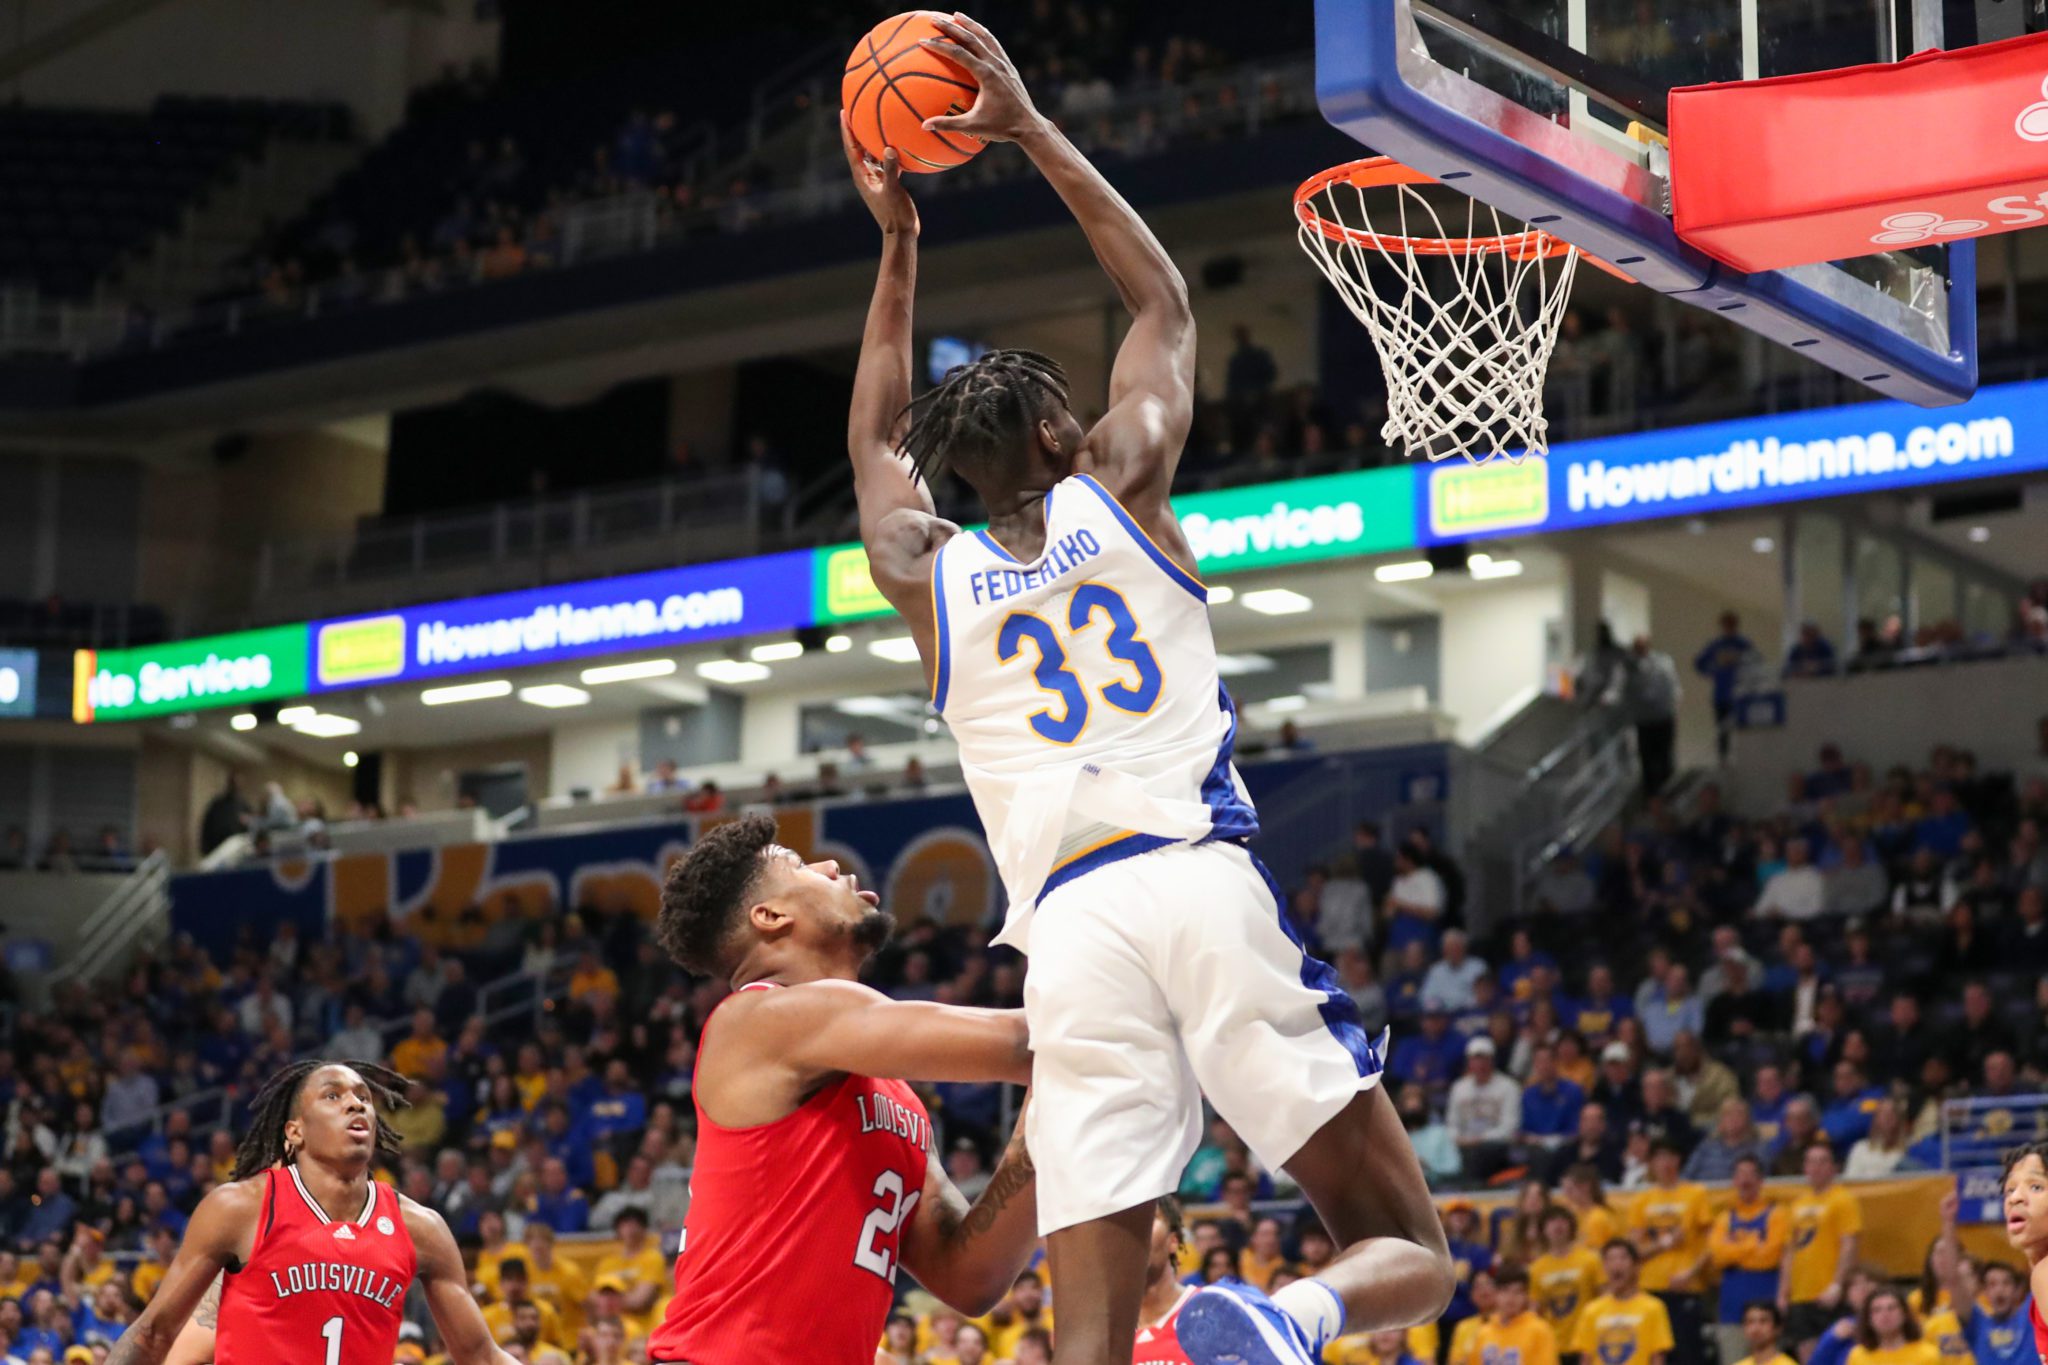 Pitt men's basketball updated the 2023-24 roster numbers and added on a new walk-on to the program, the team announced Wednesday.